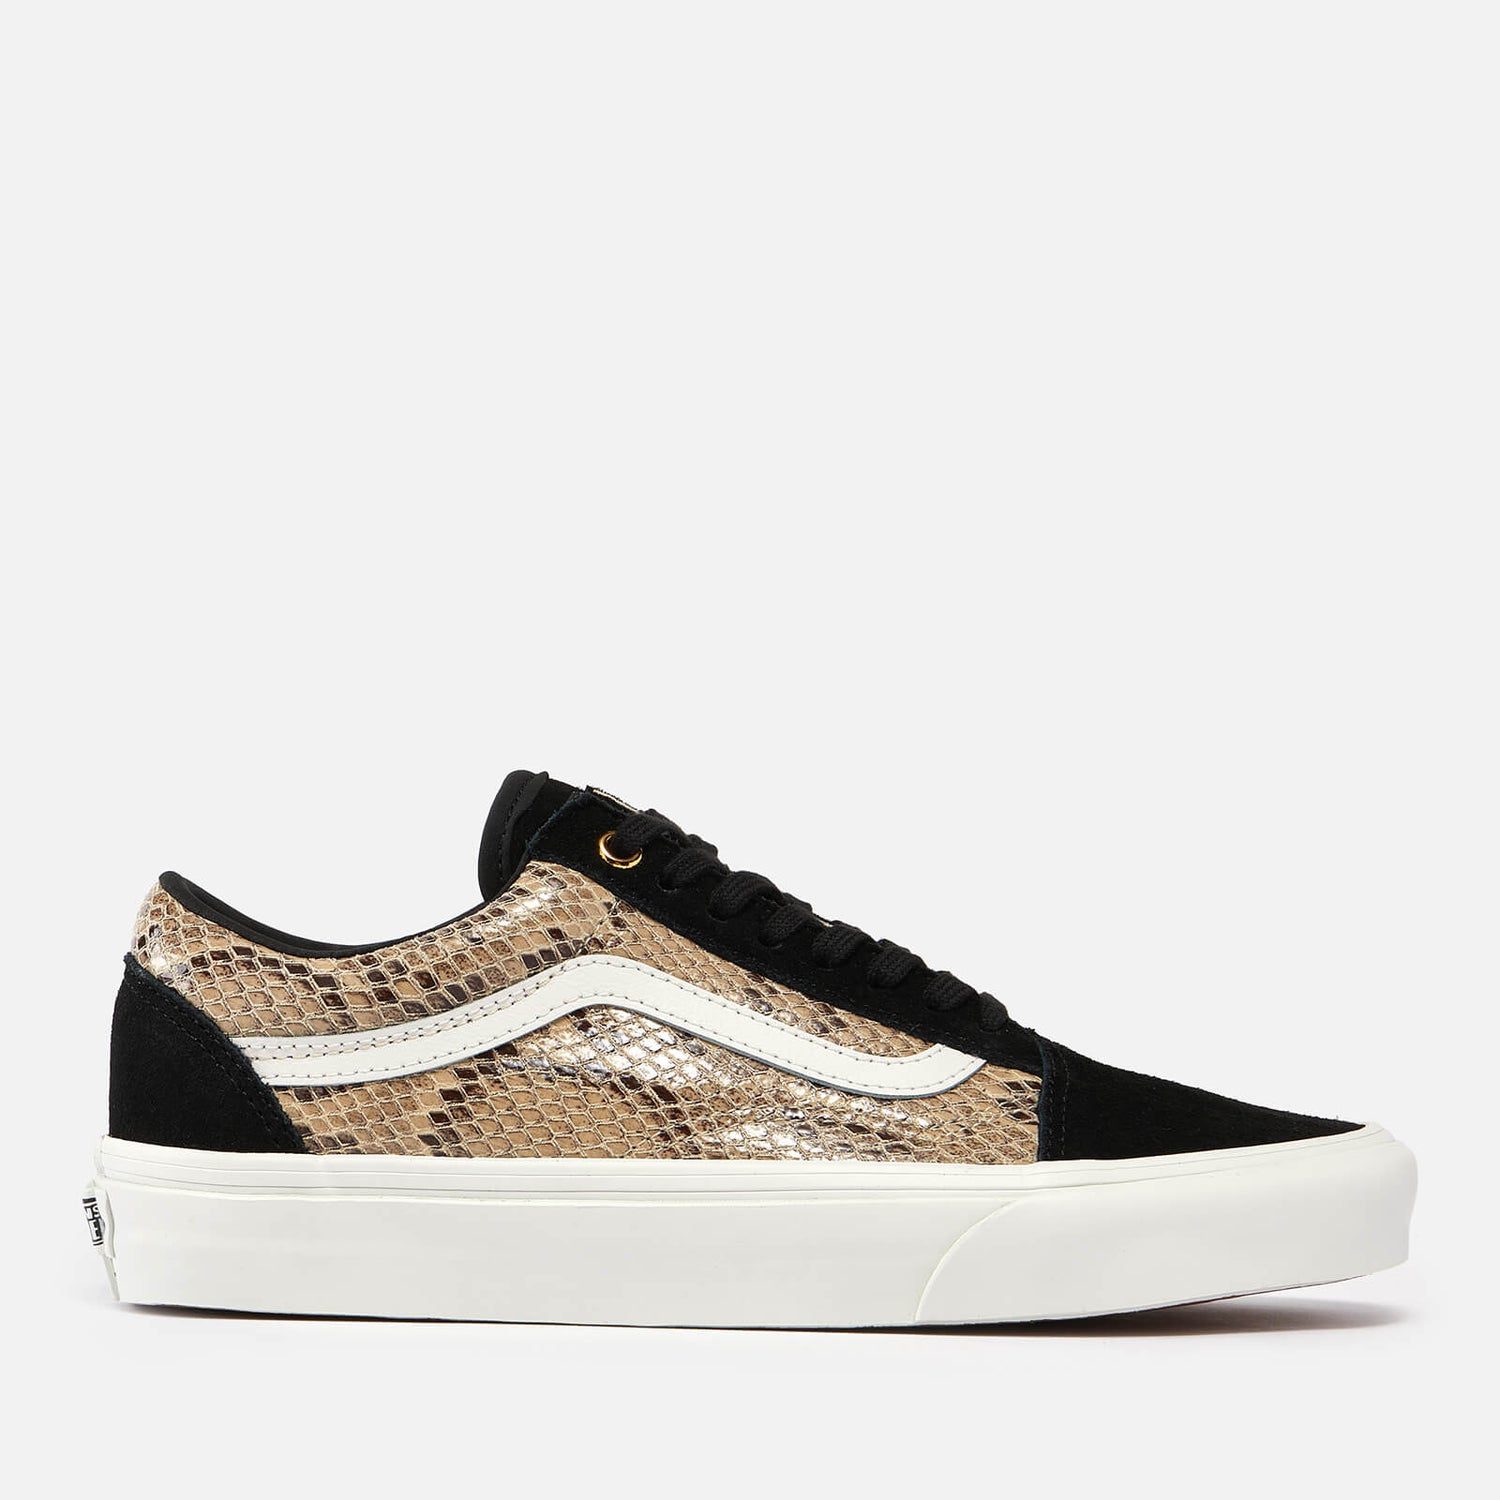 Vans Old Skool Suede and Canvas-Blend Trainers - UK 3